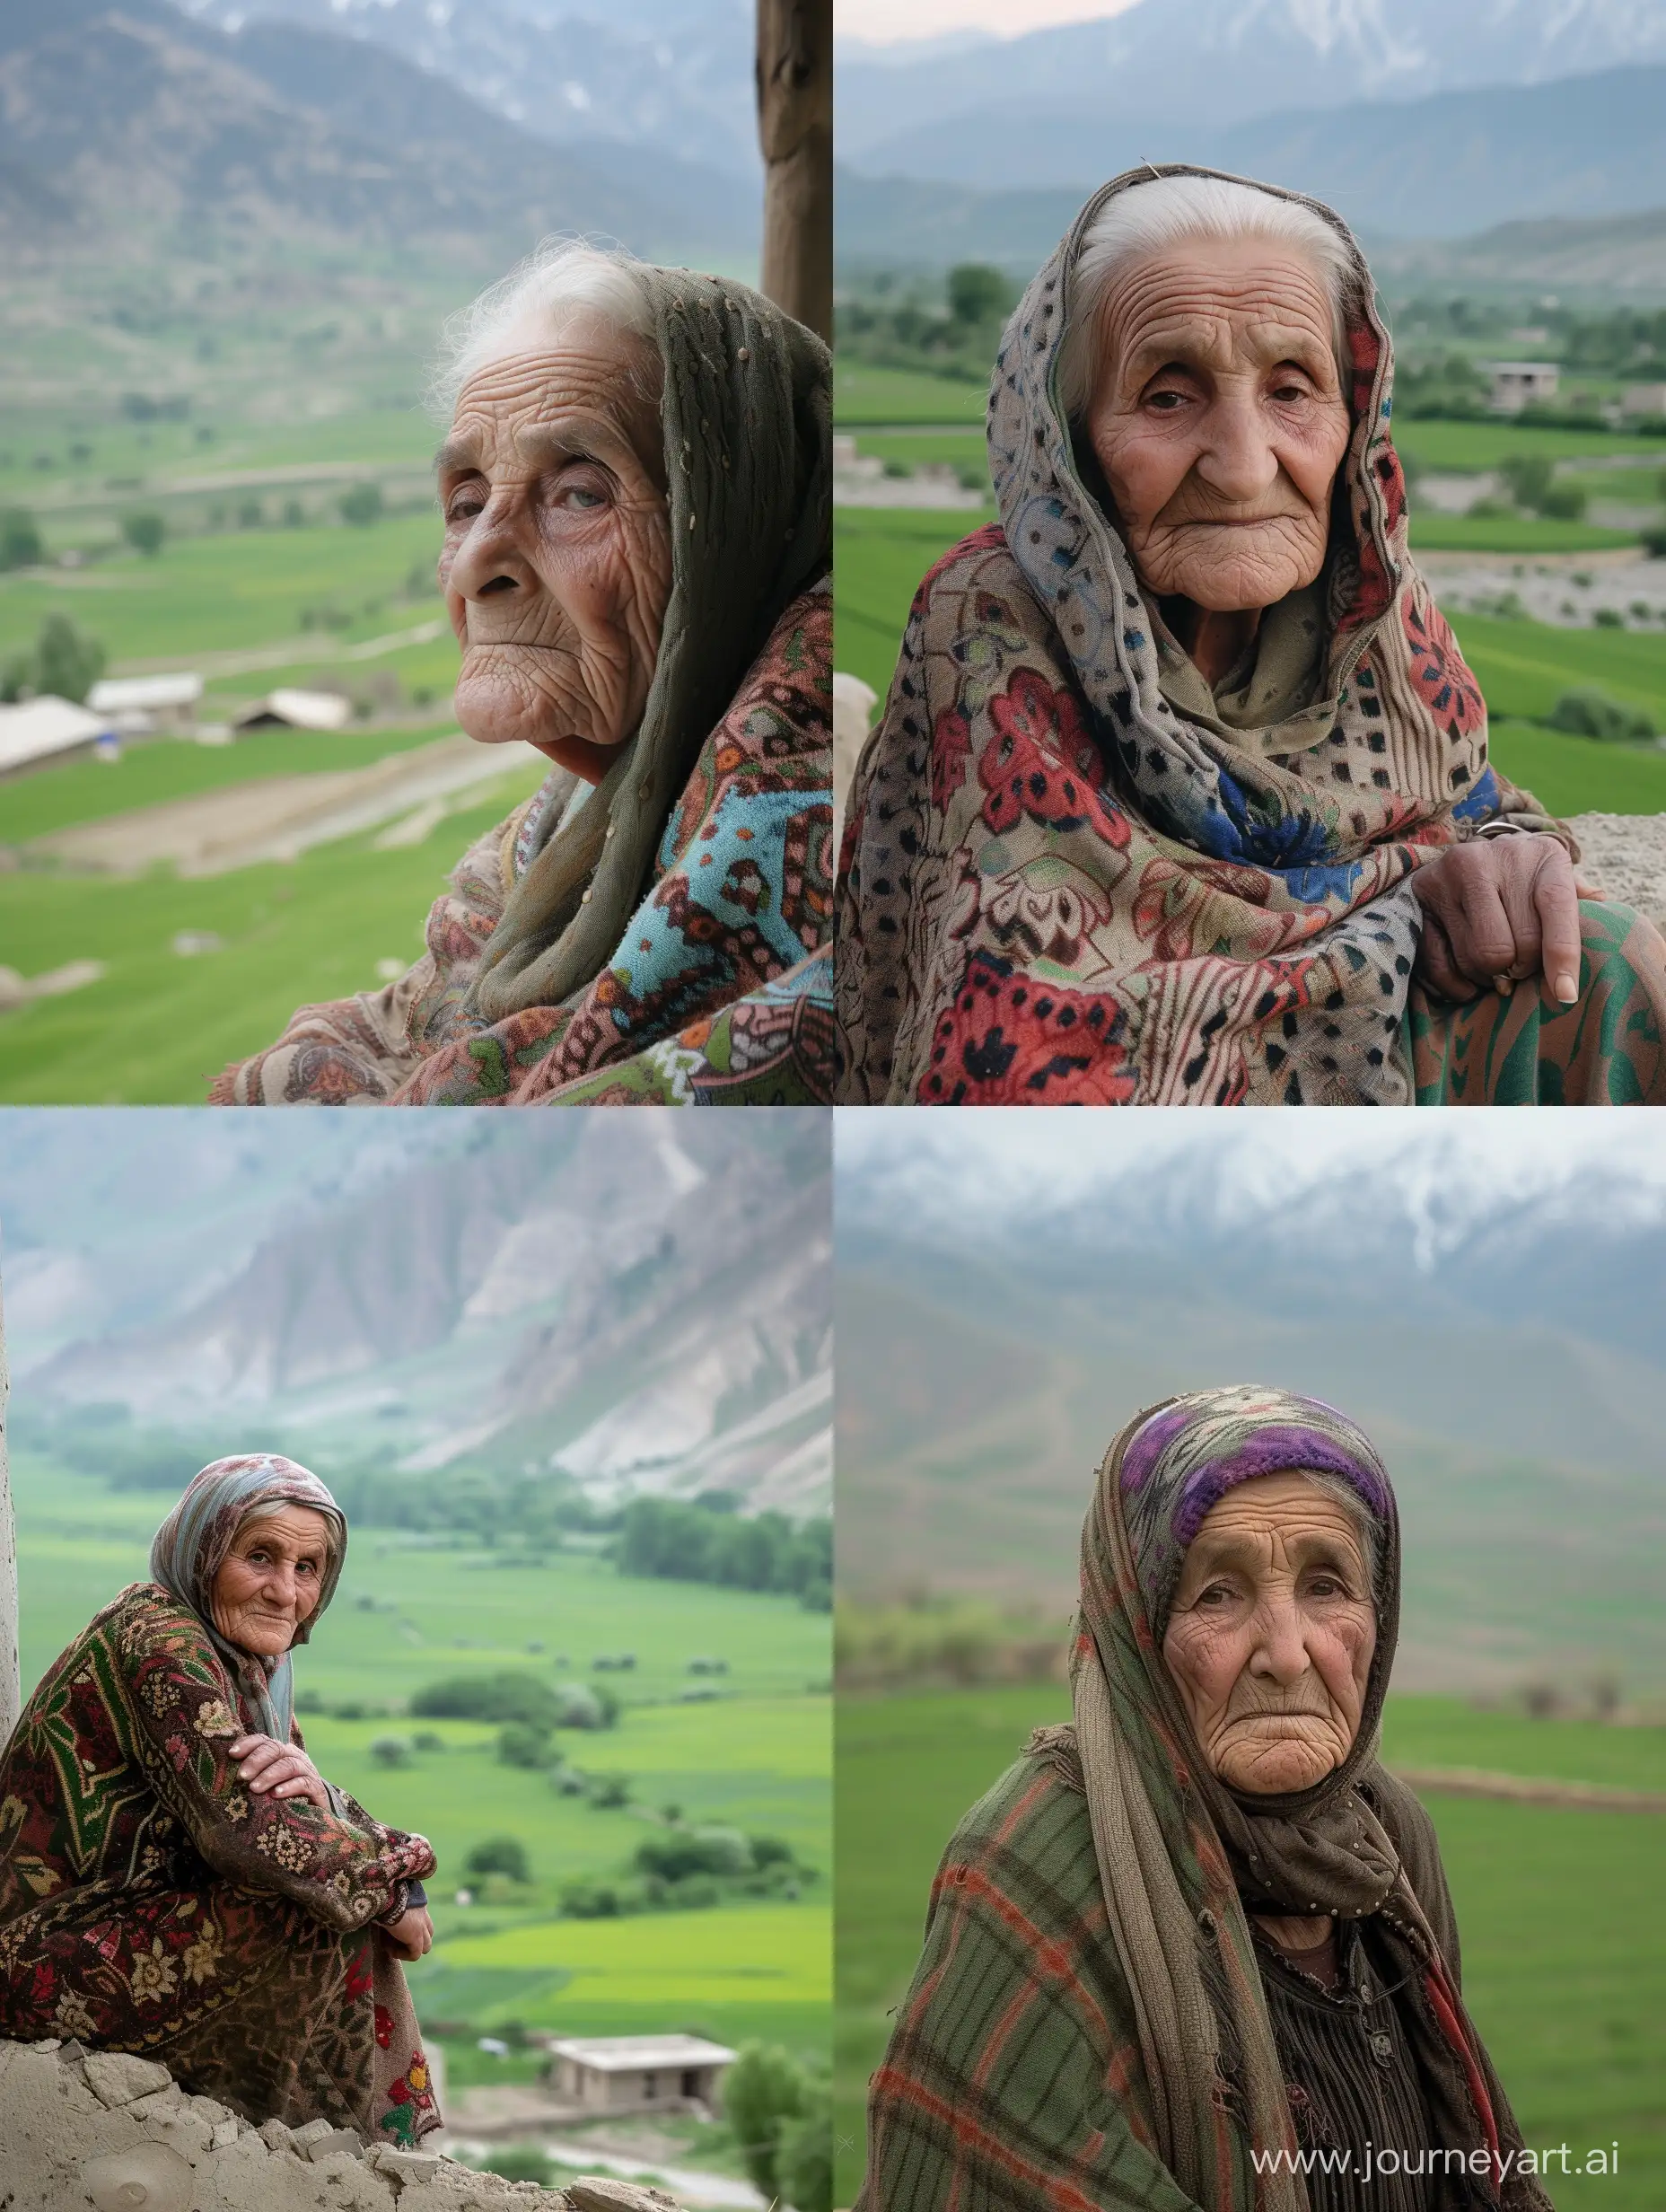 Kindhearted-Elderly-Woman-Fatima-Living-Serenely-in-a-Charming-Village